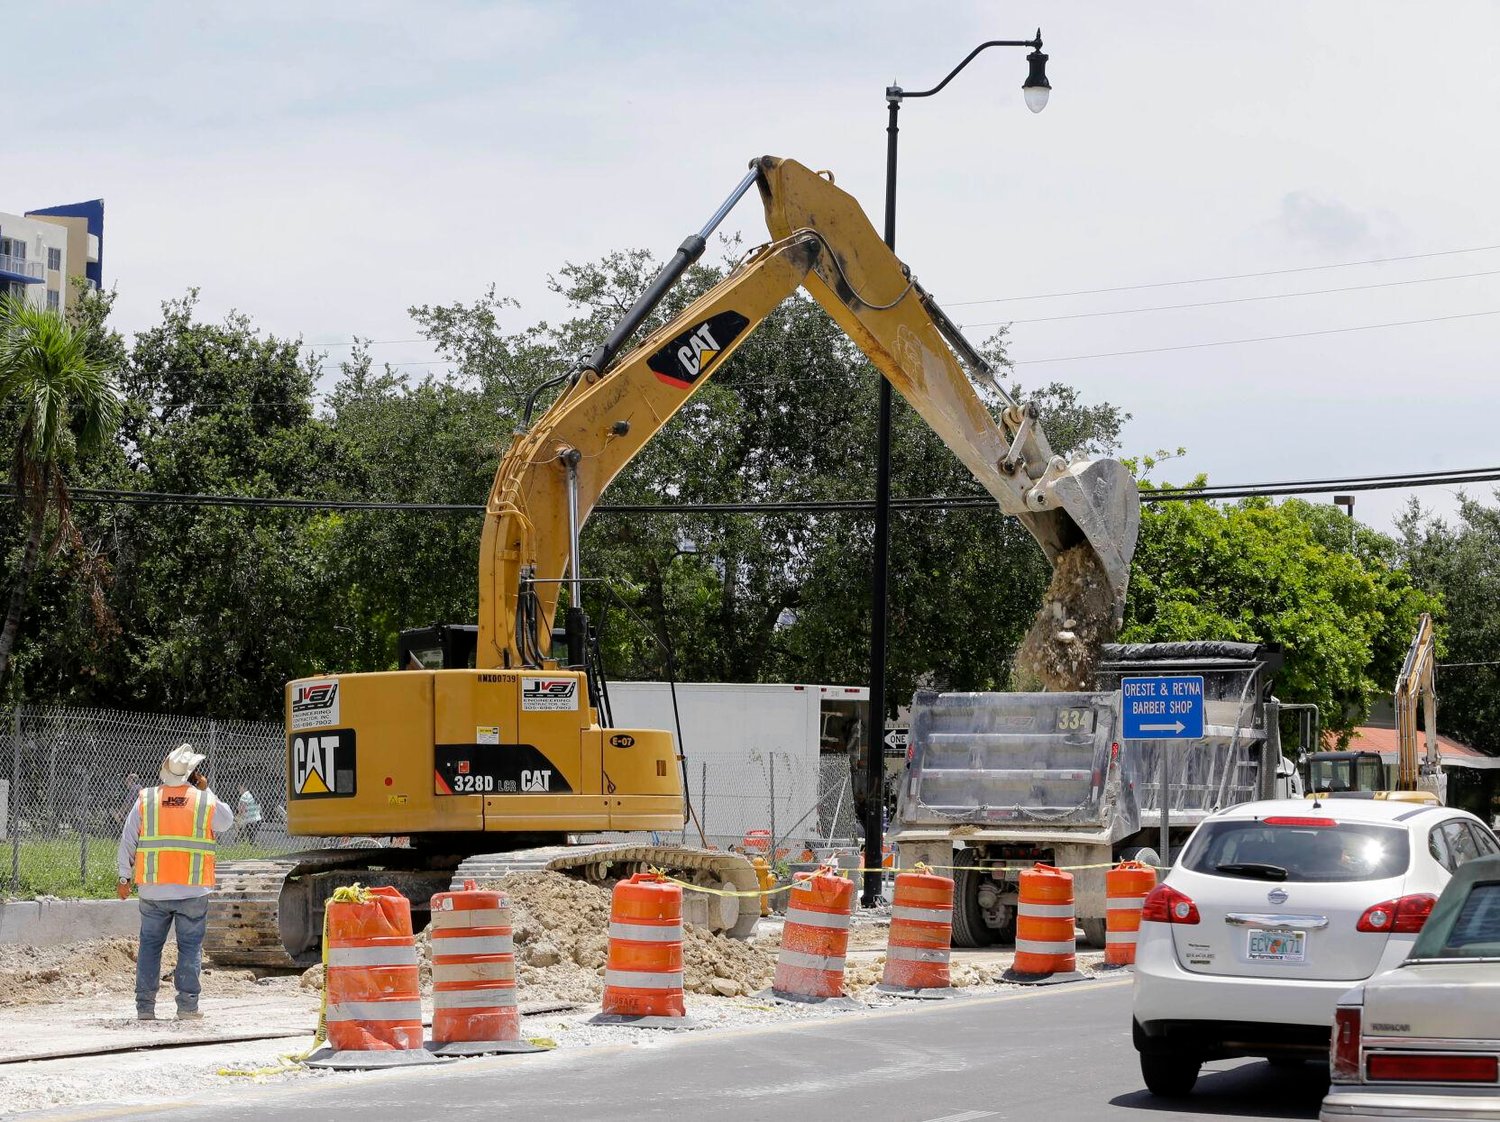 A 328D LCR Caterpillar excavator works on a road construction site in Florida. AP Photo/Alan Diaz